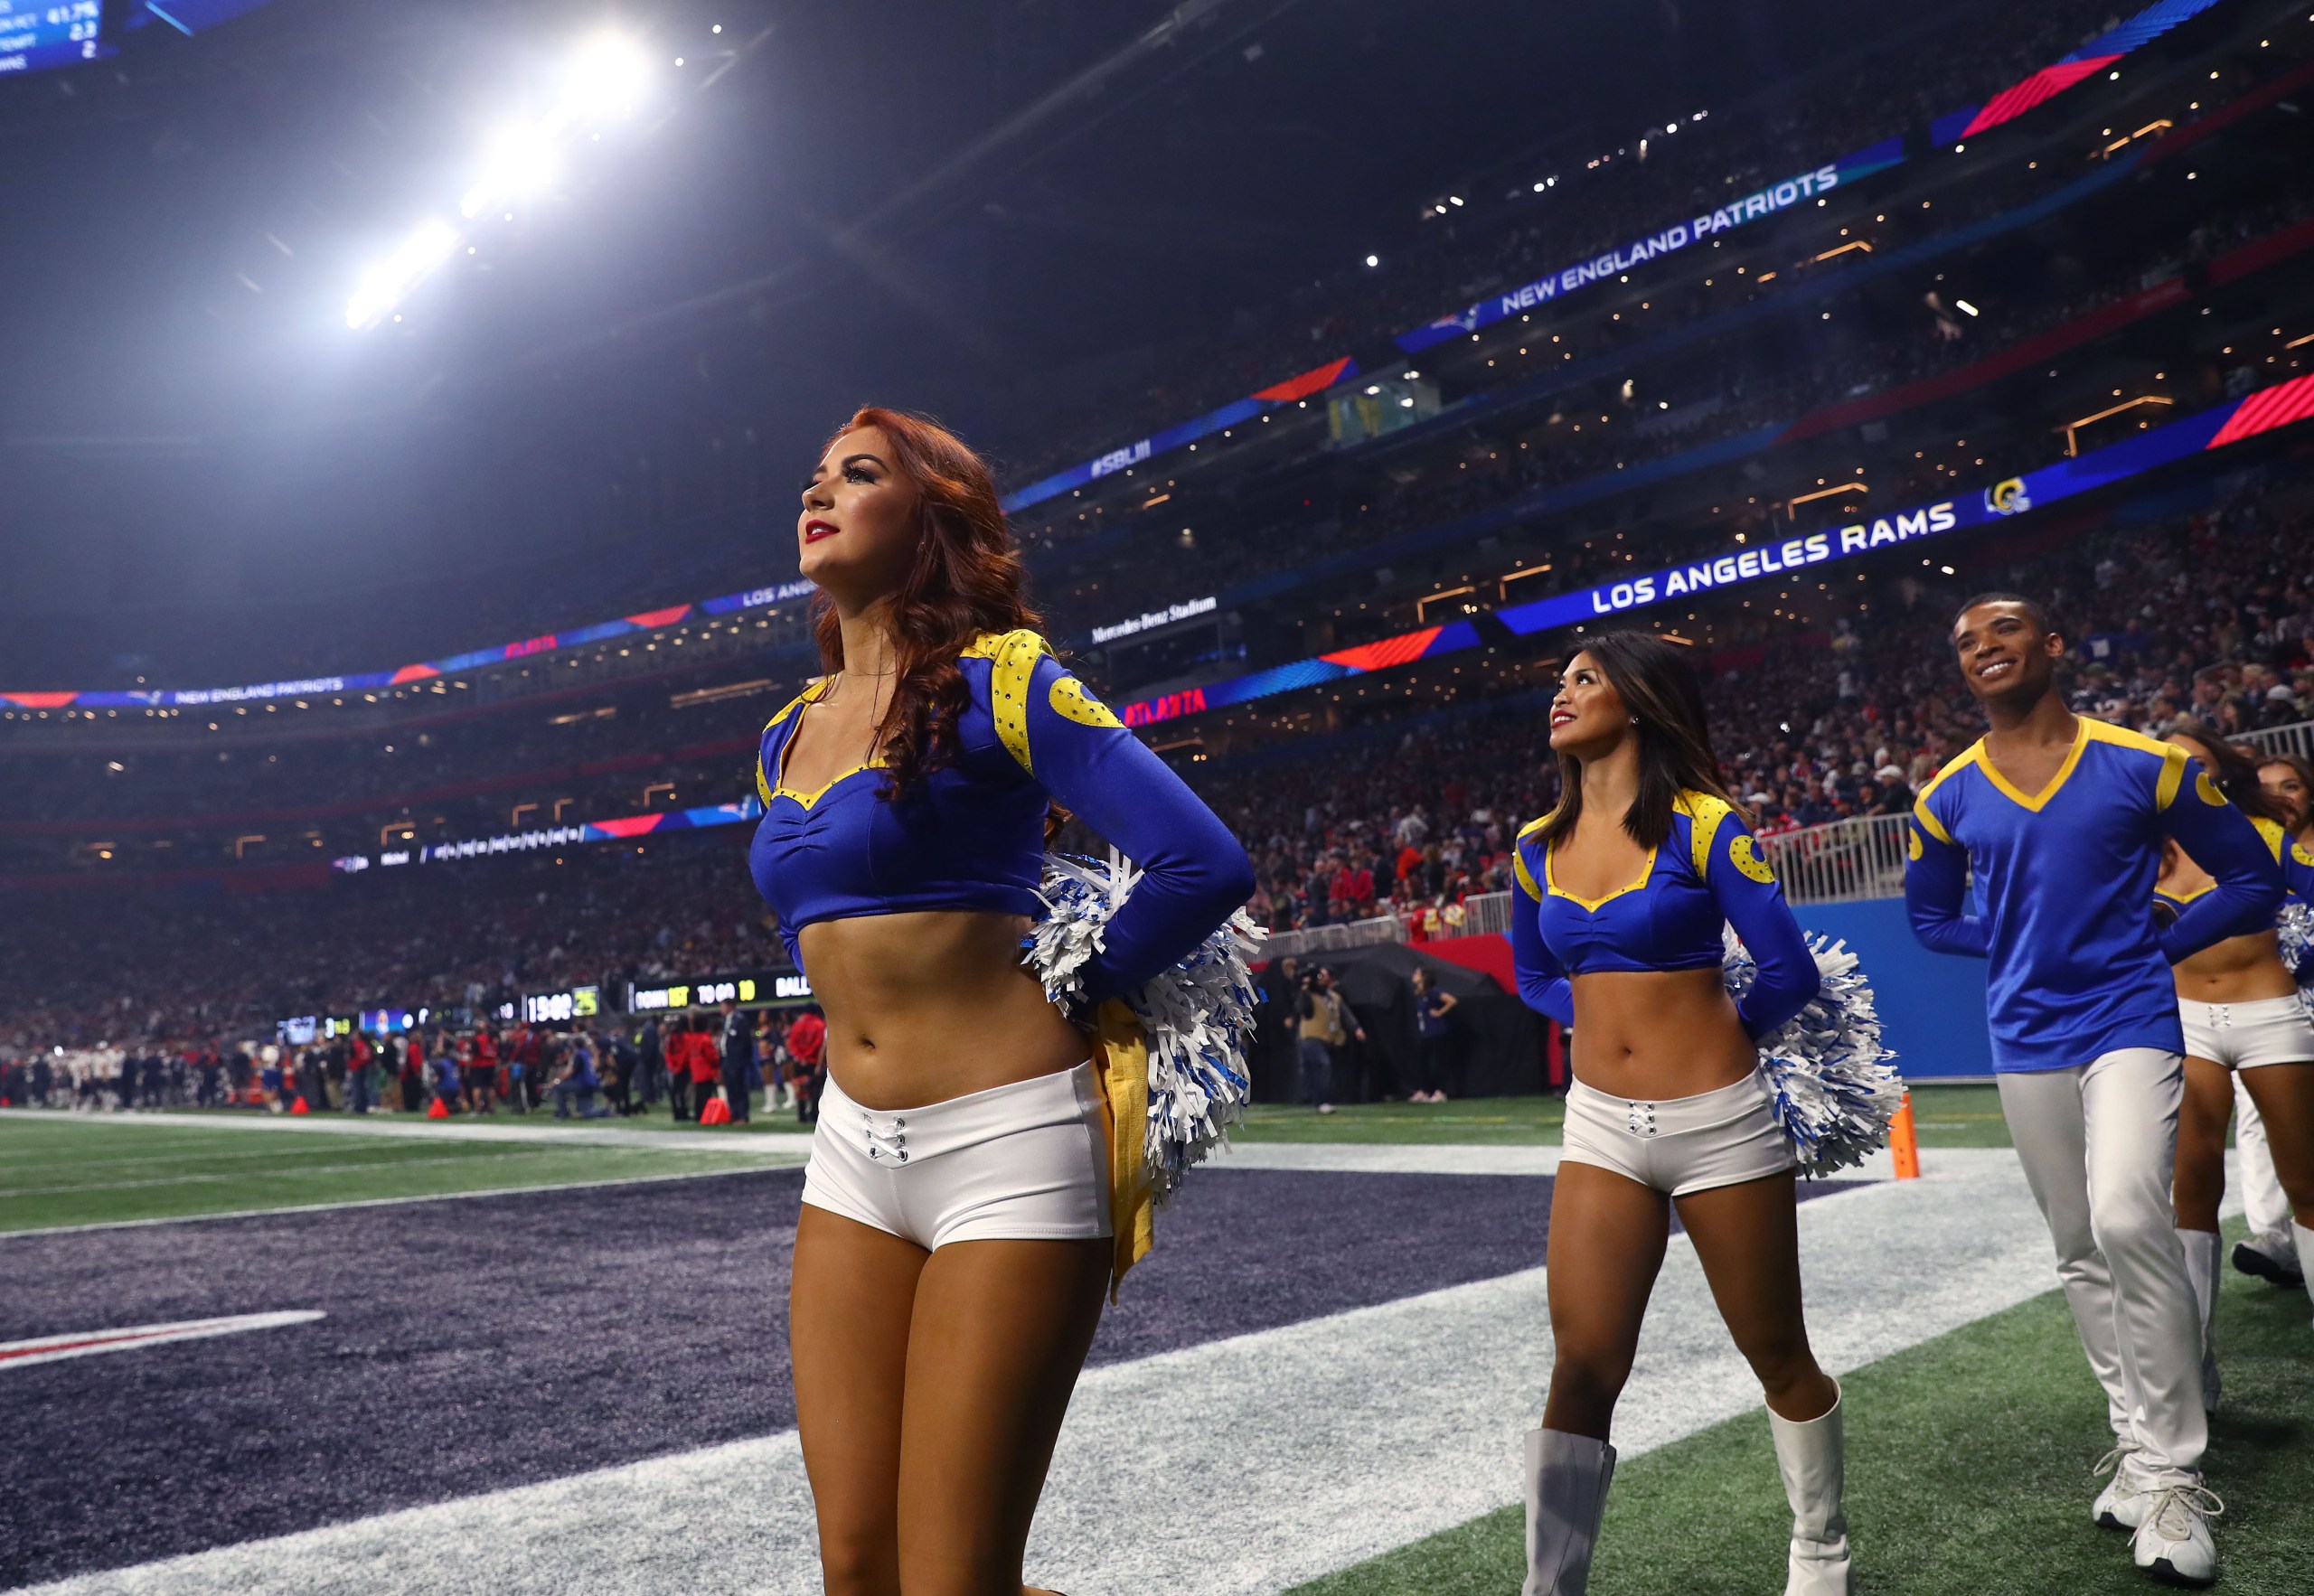 amber corning recommends hot naked nfl cheerleaders pic